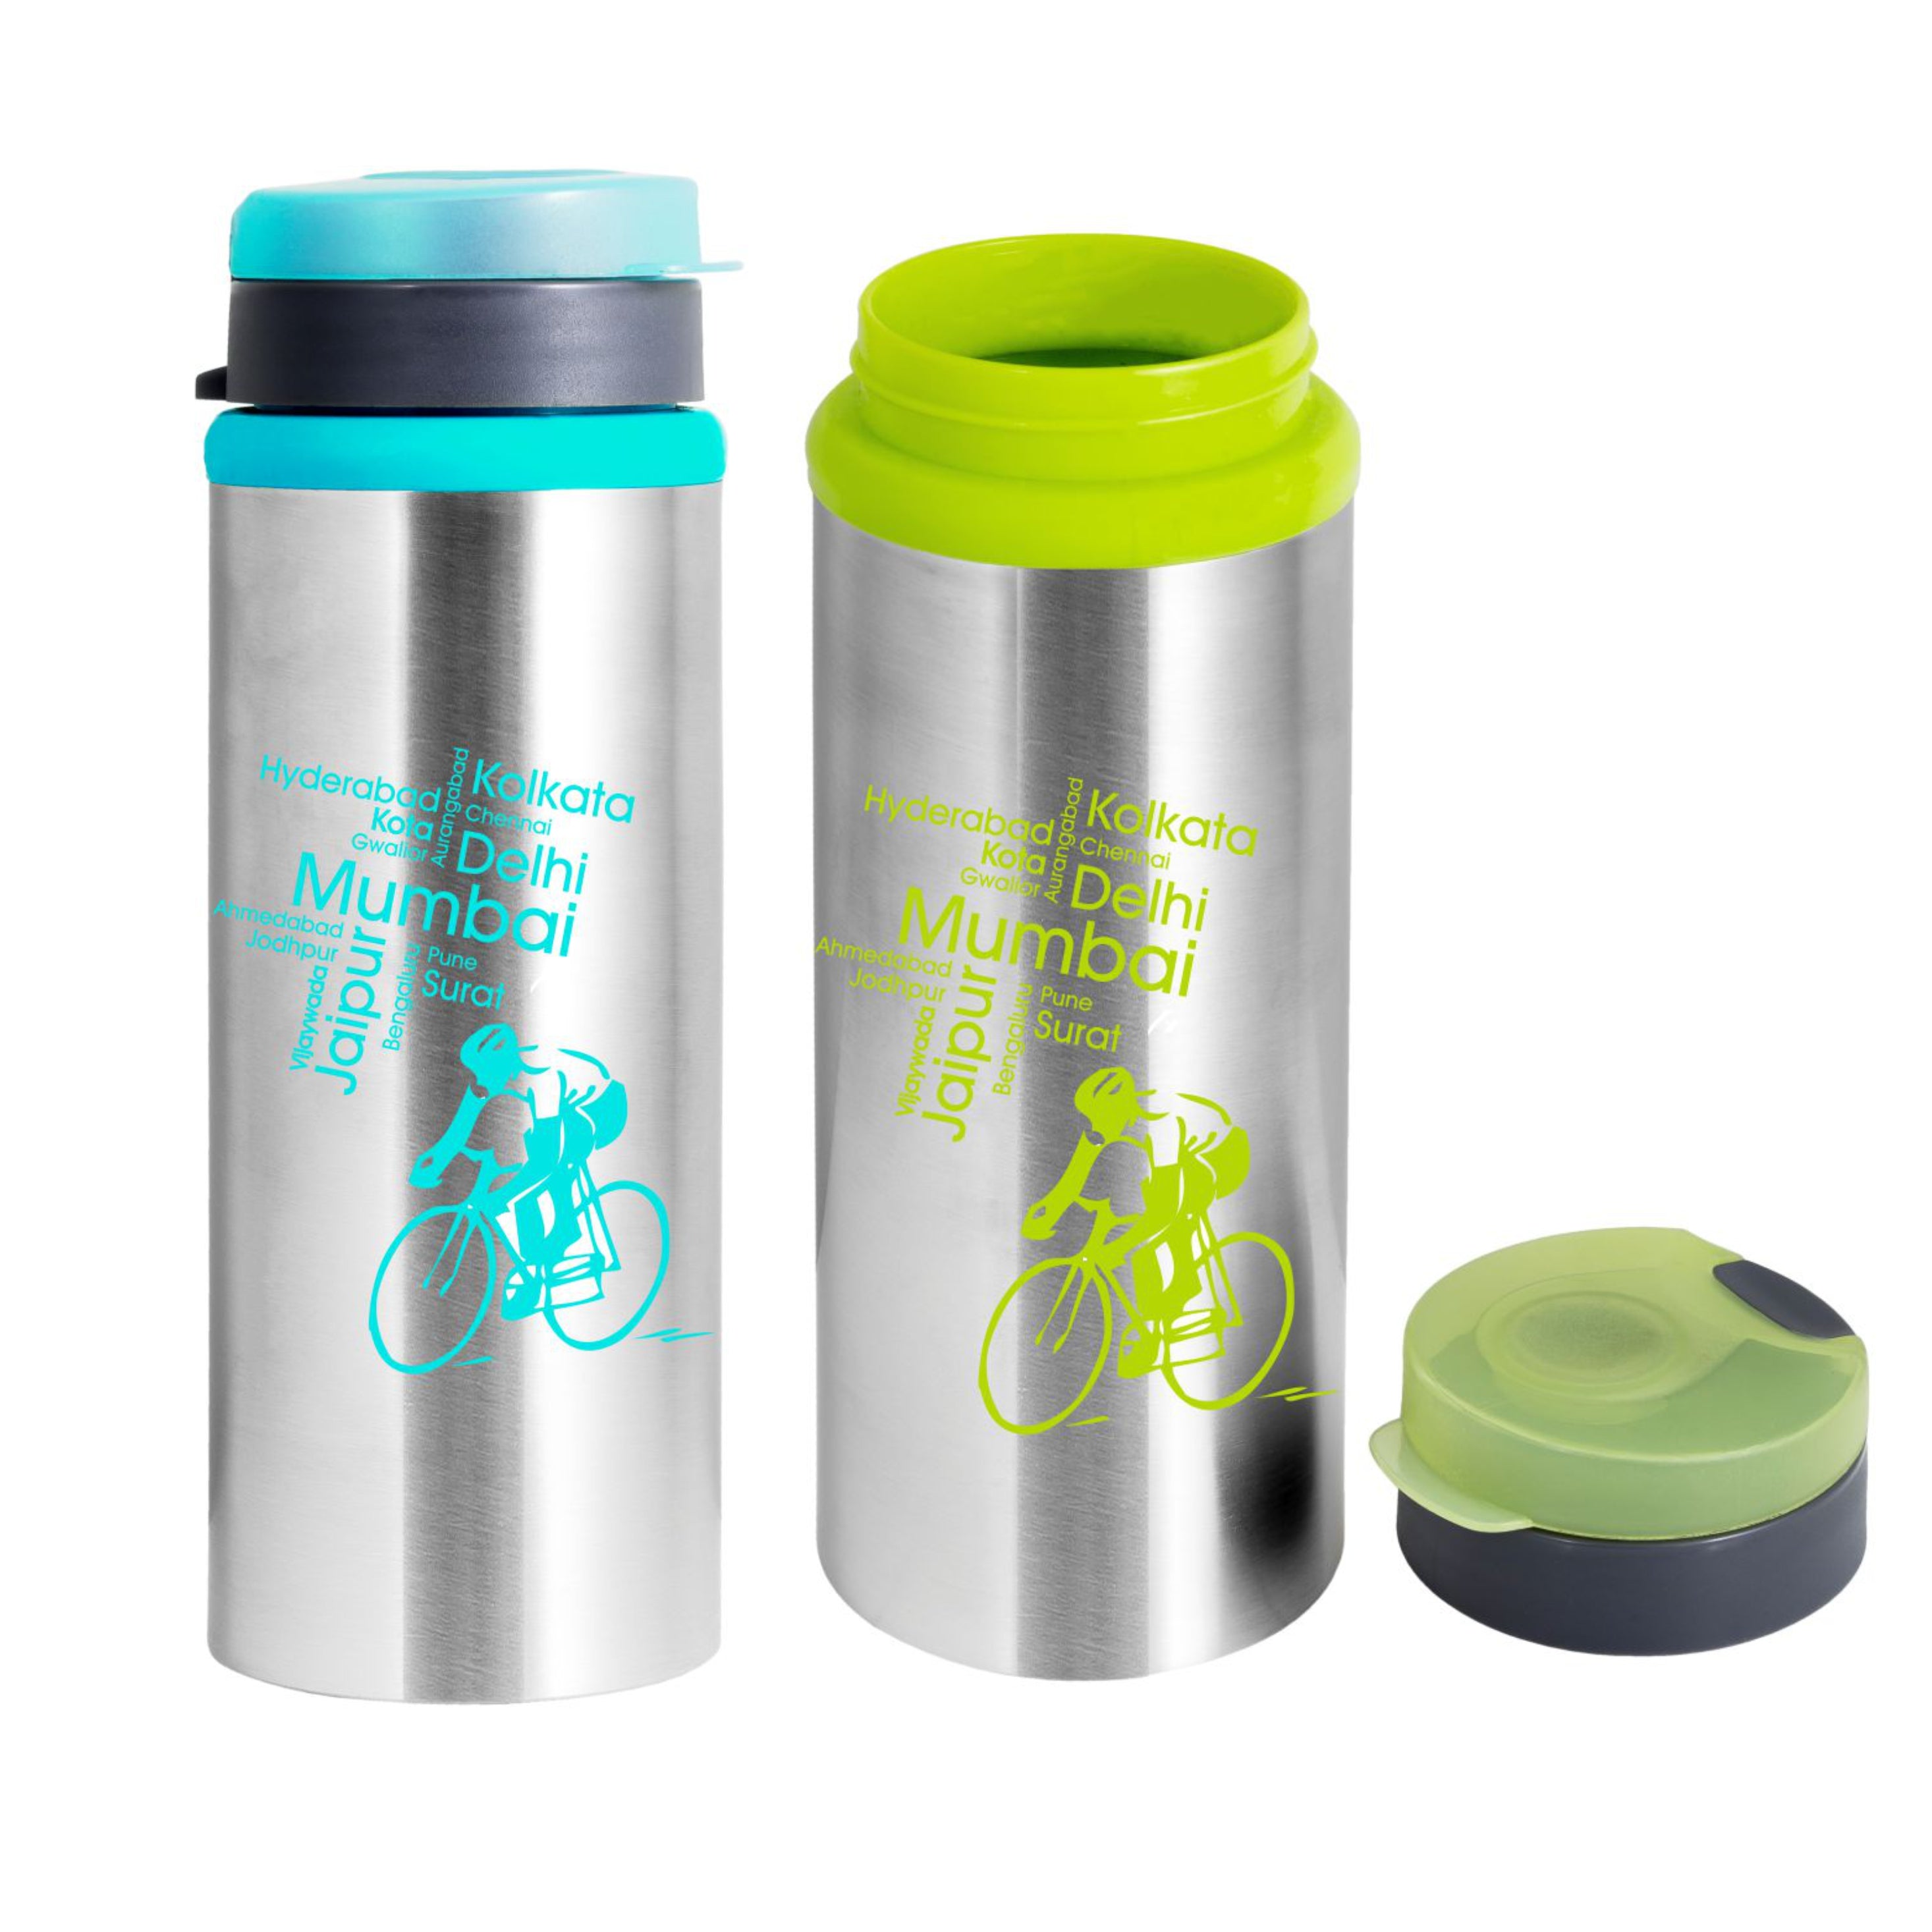 NanoNine Sprint 750 ml X 2, Assorted Color Single Wall Flip Top Stainless Steel Water Bottle.